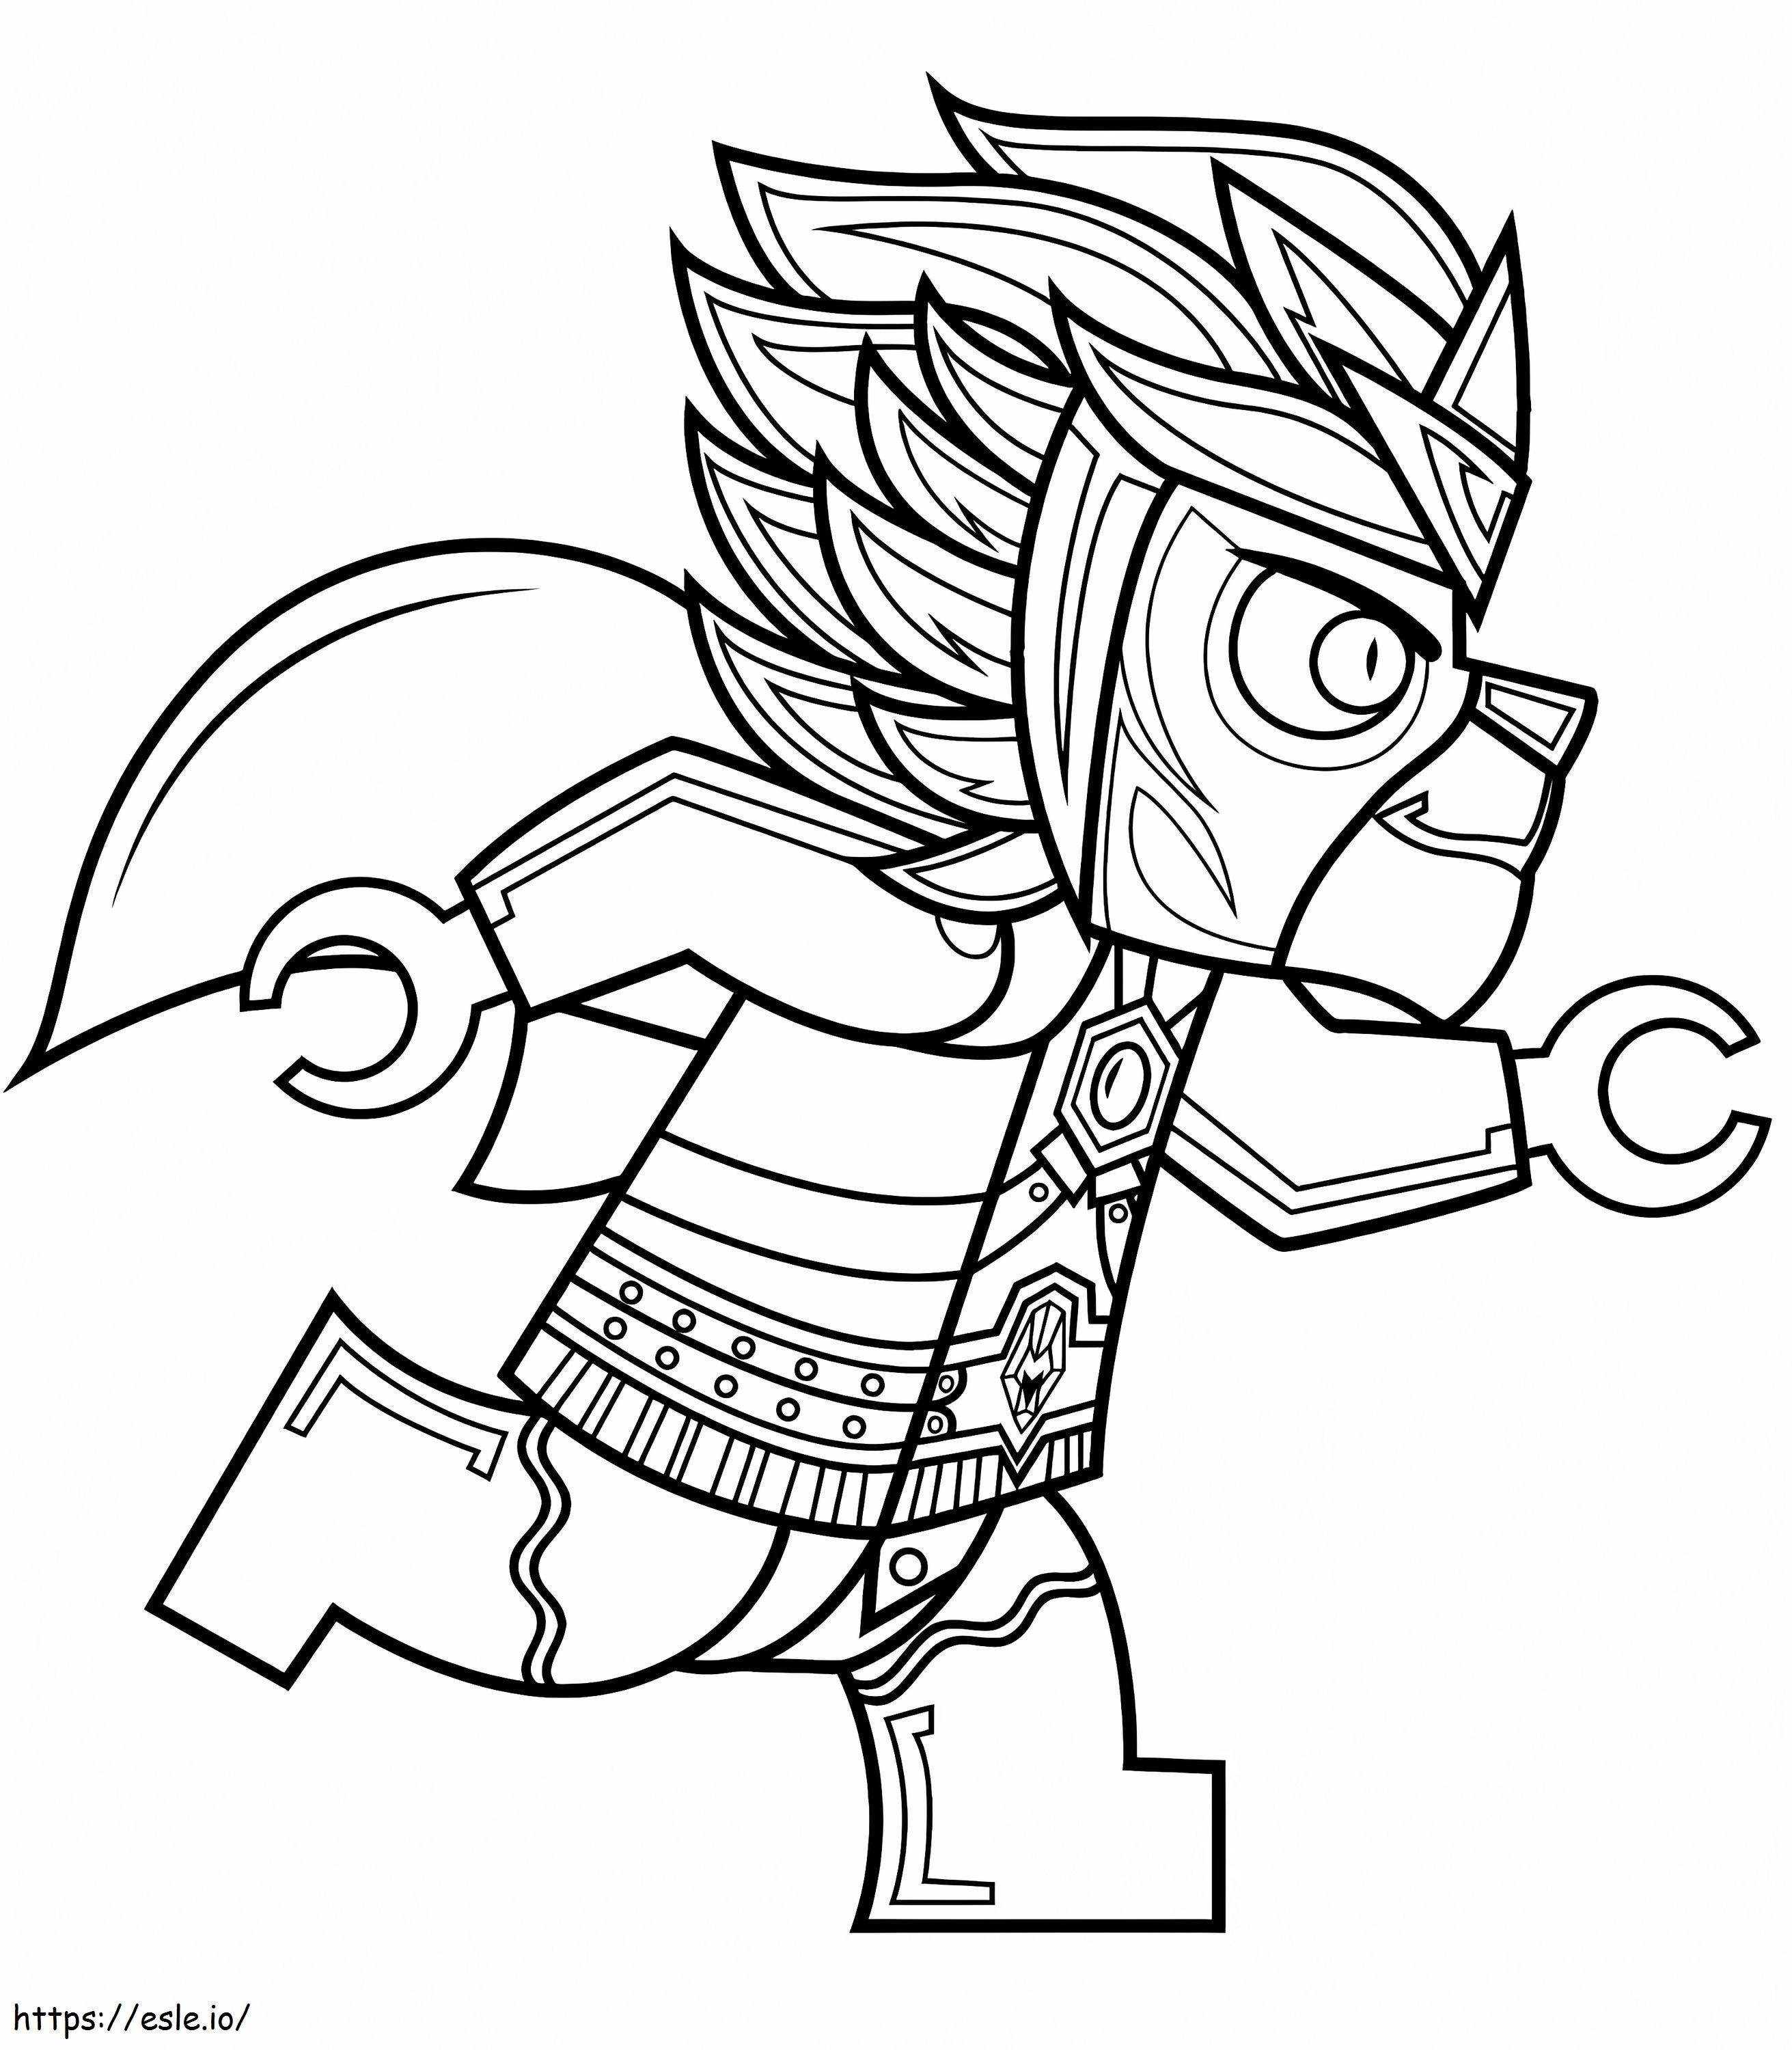 Lego Chima Laval coloring page